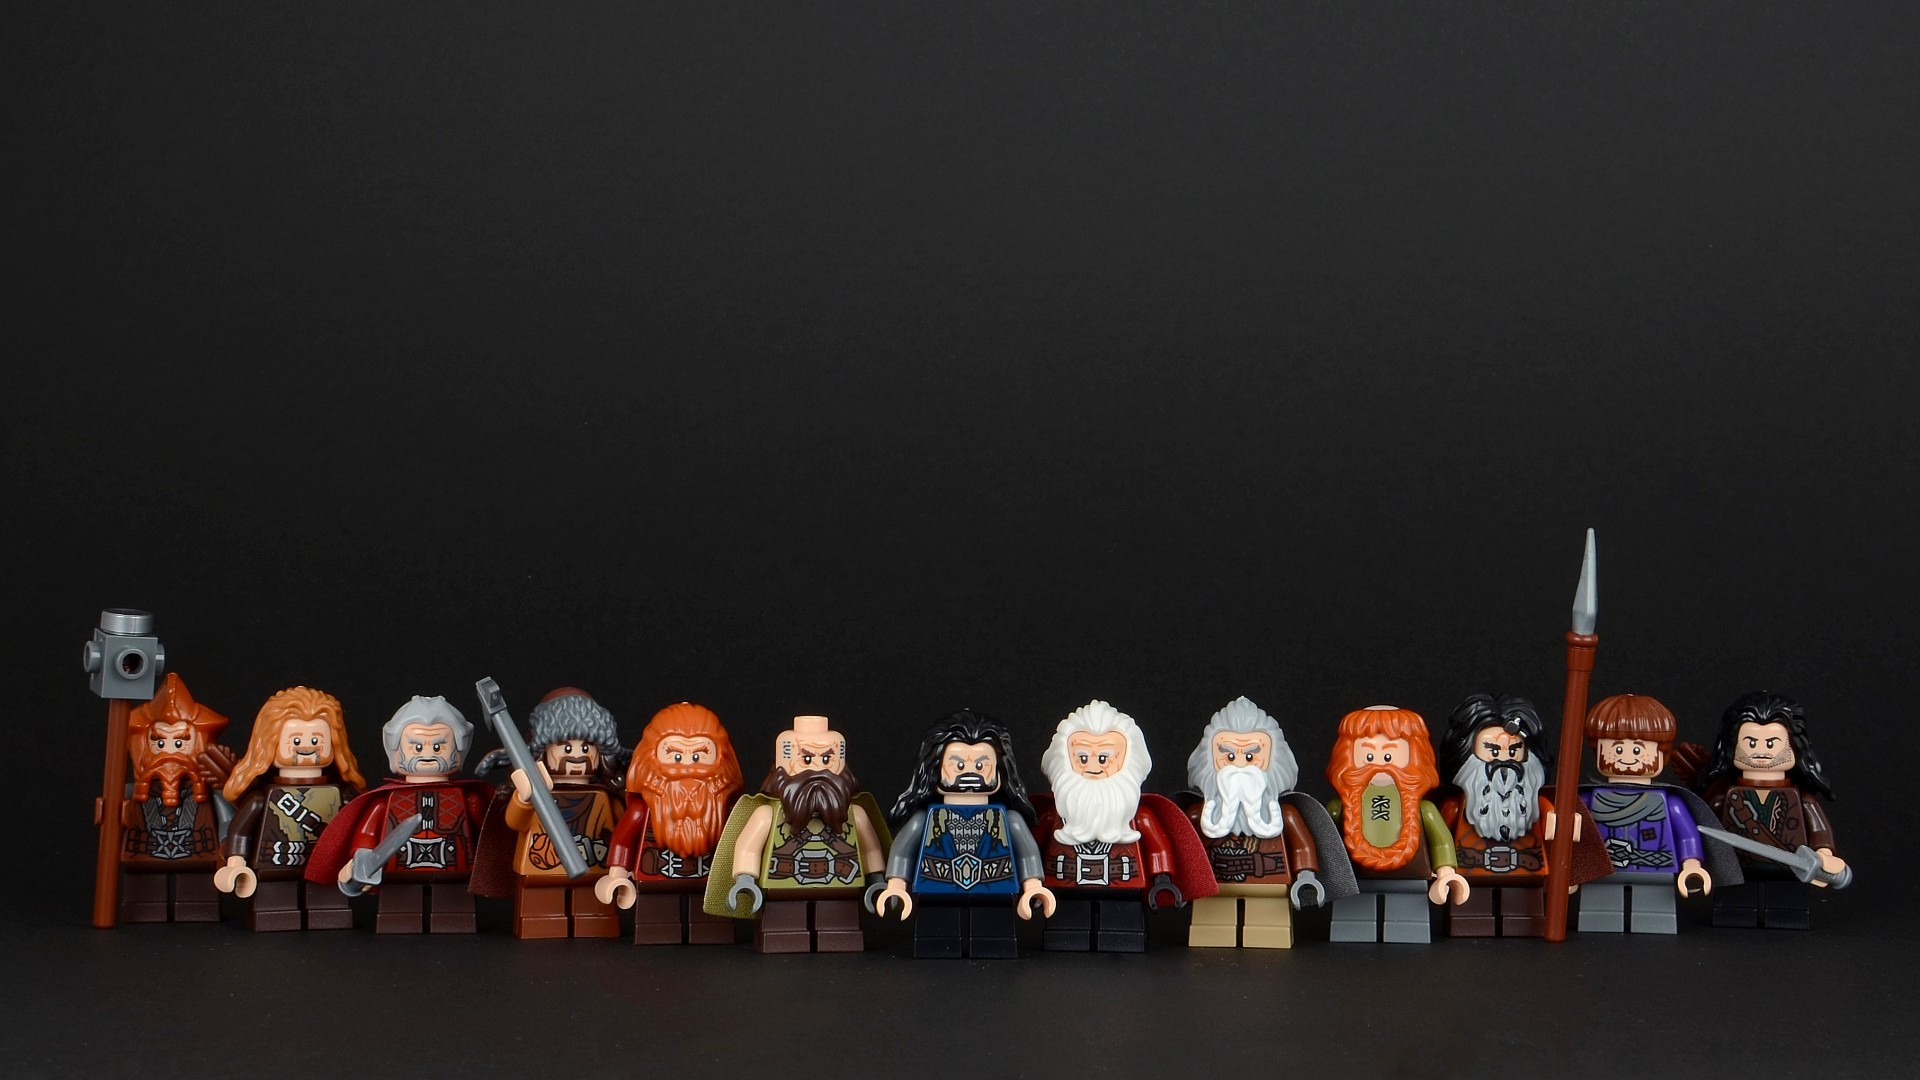 General 1920x1080 LEGO The Hobbit The Lord of the Rings Thorin Oakenshield dwarf simple background black background toys figurines Book characters